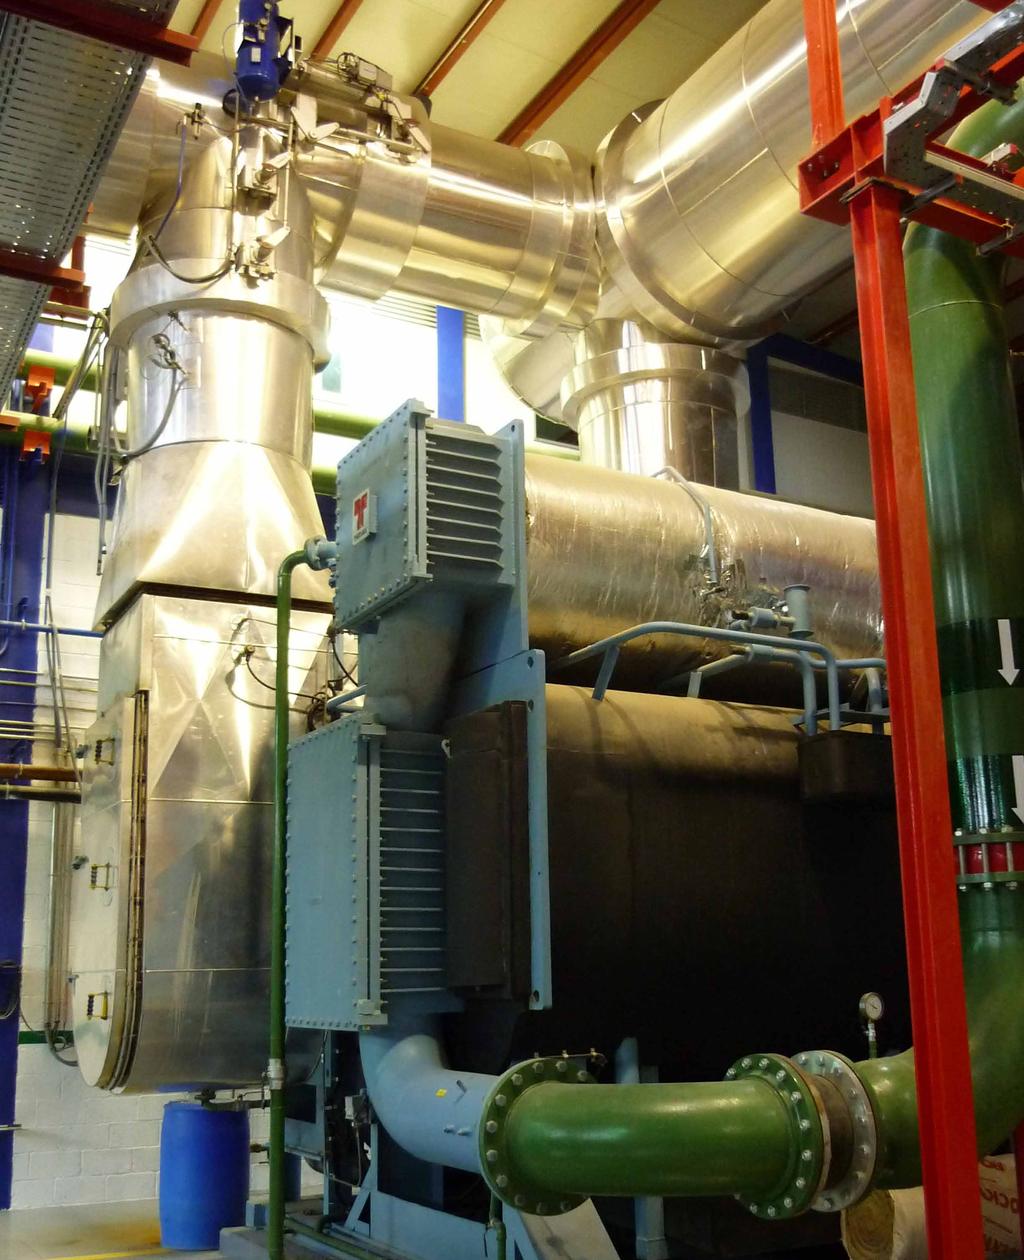 using the hot water obtained from the cogeneration engines.